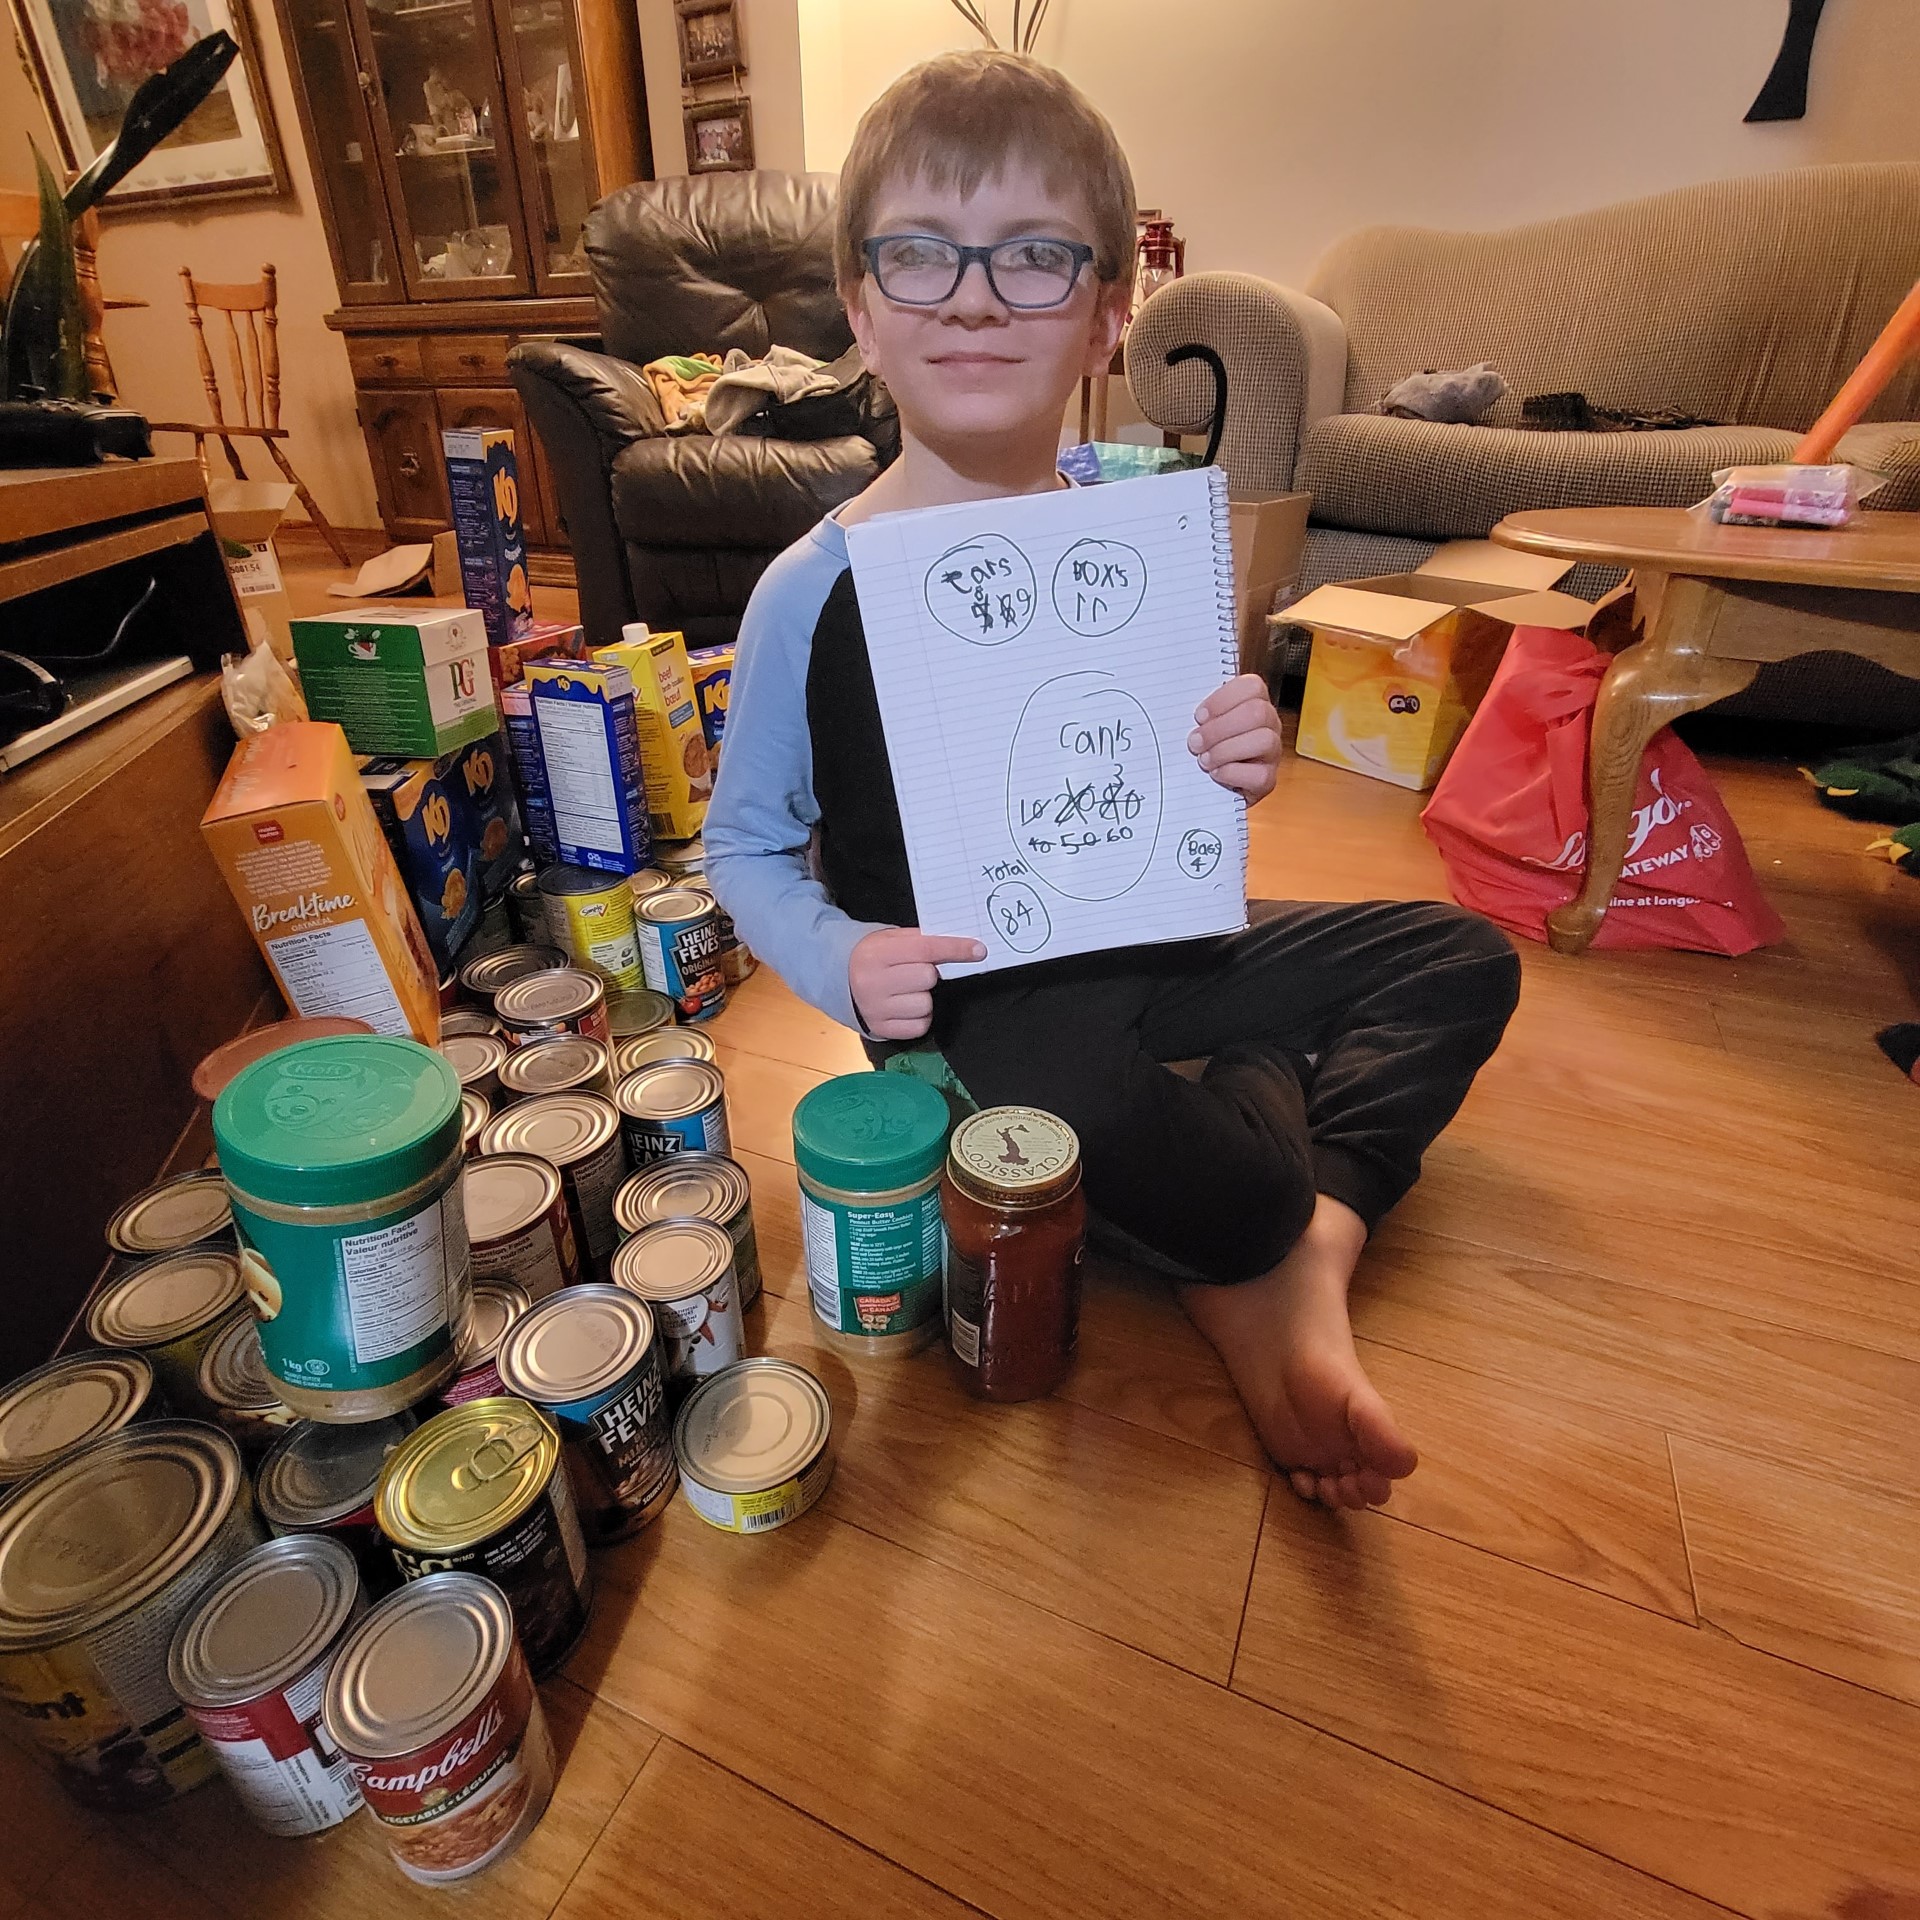 Zack pictured with food collected